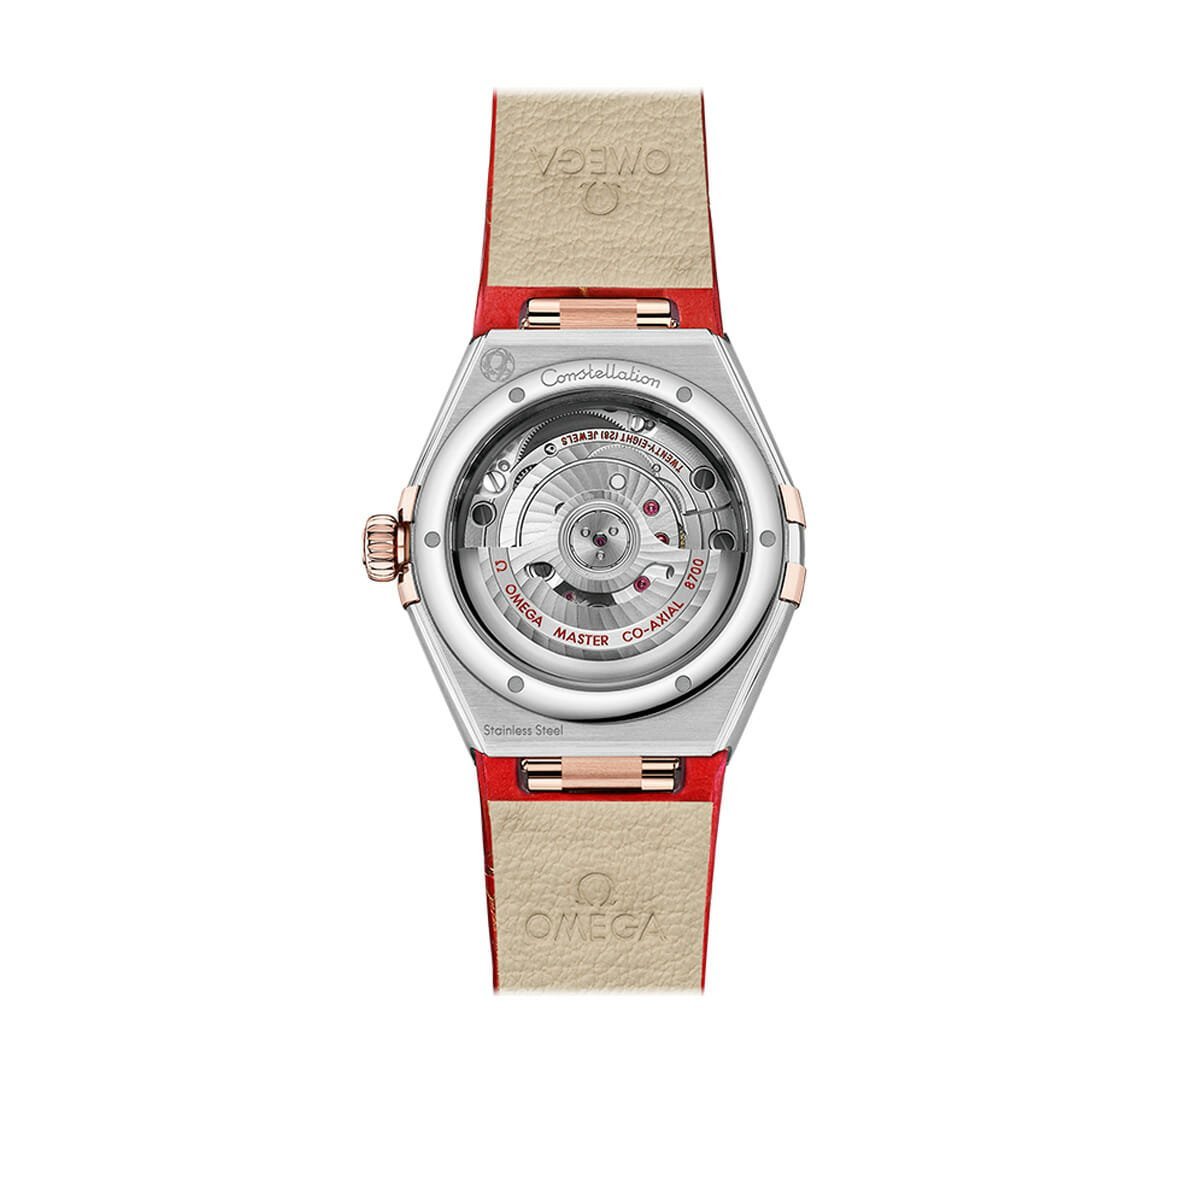 Constellation Co-Axial Master Chronometer 29mm Watch